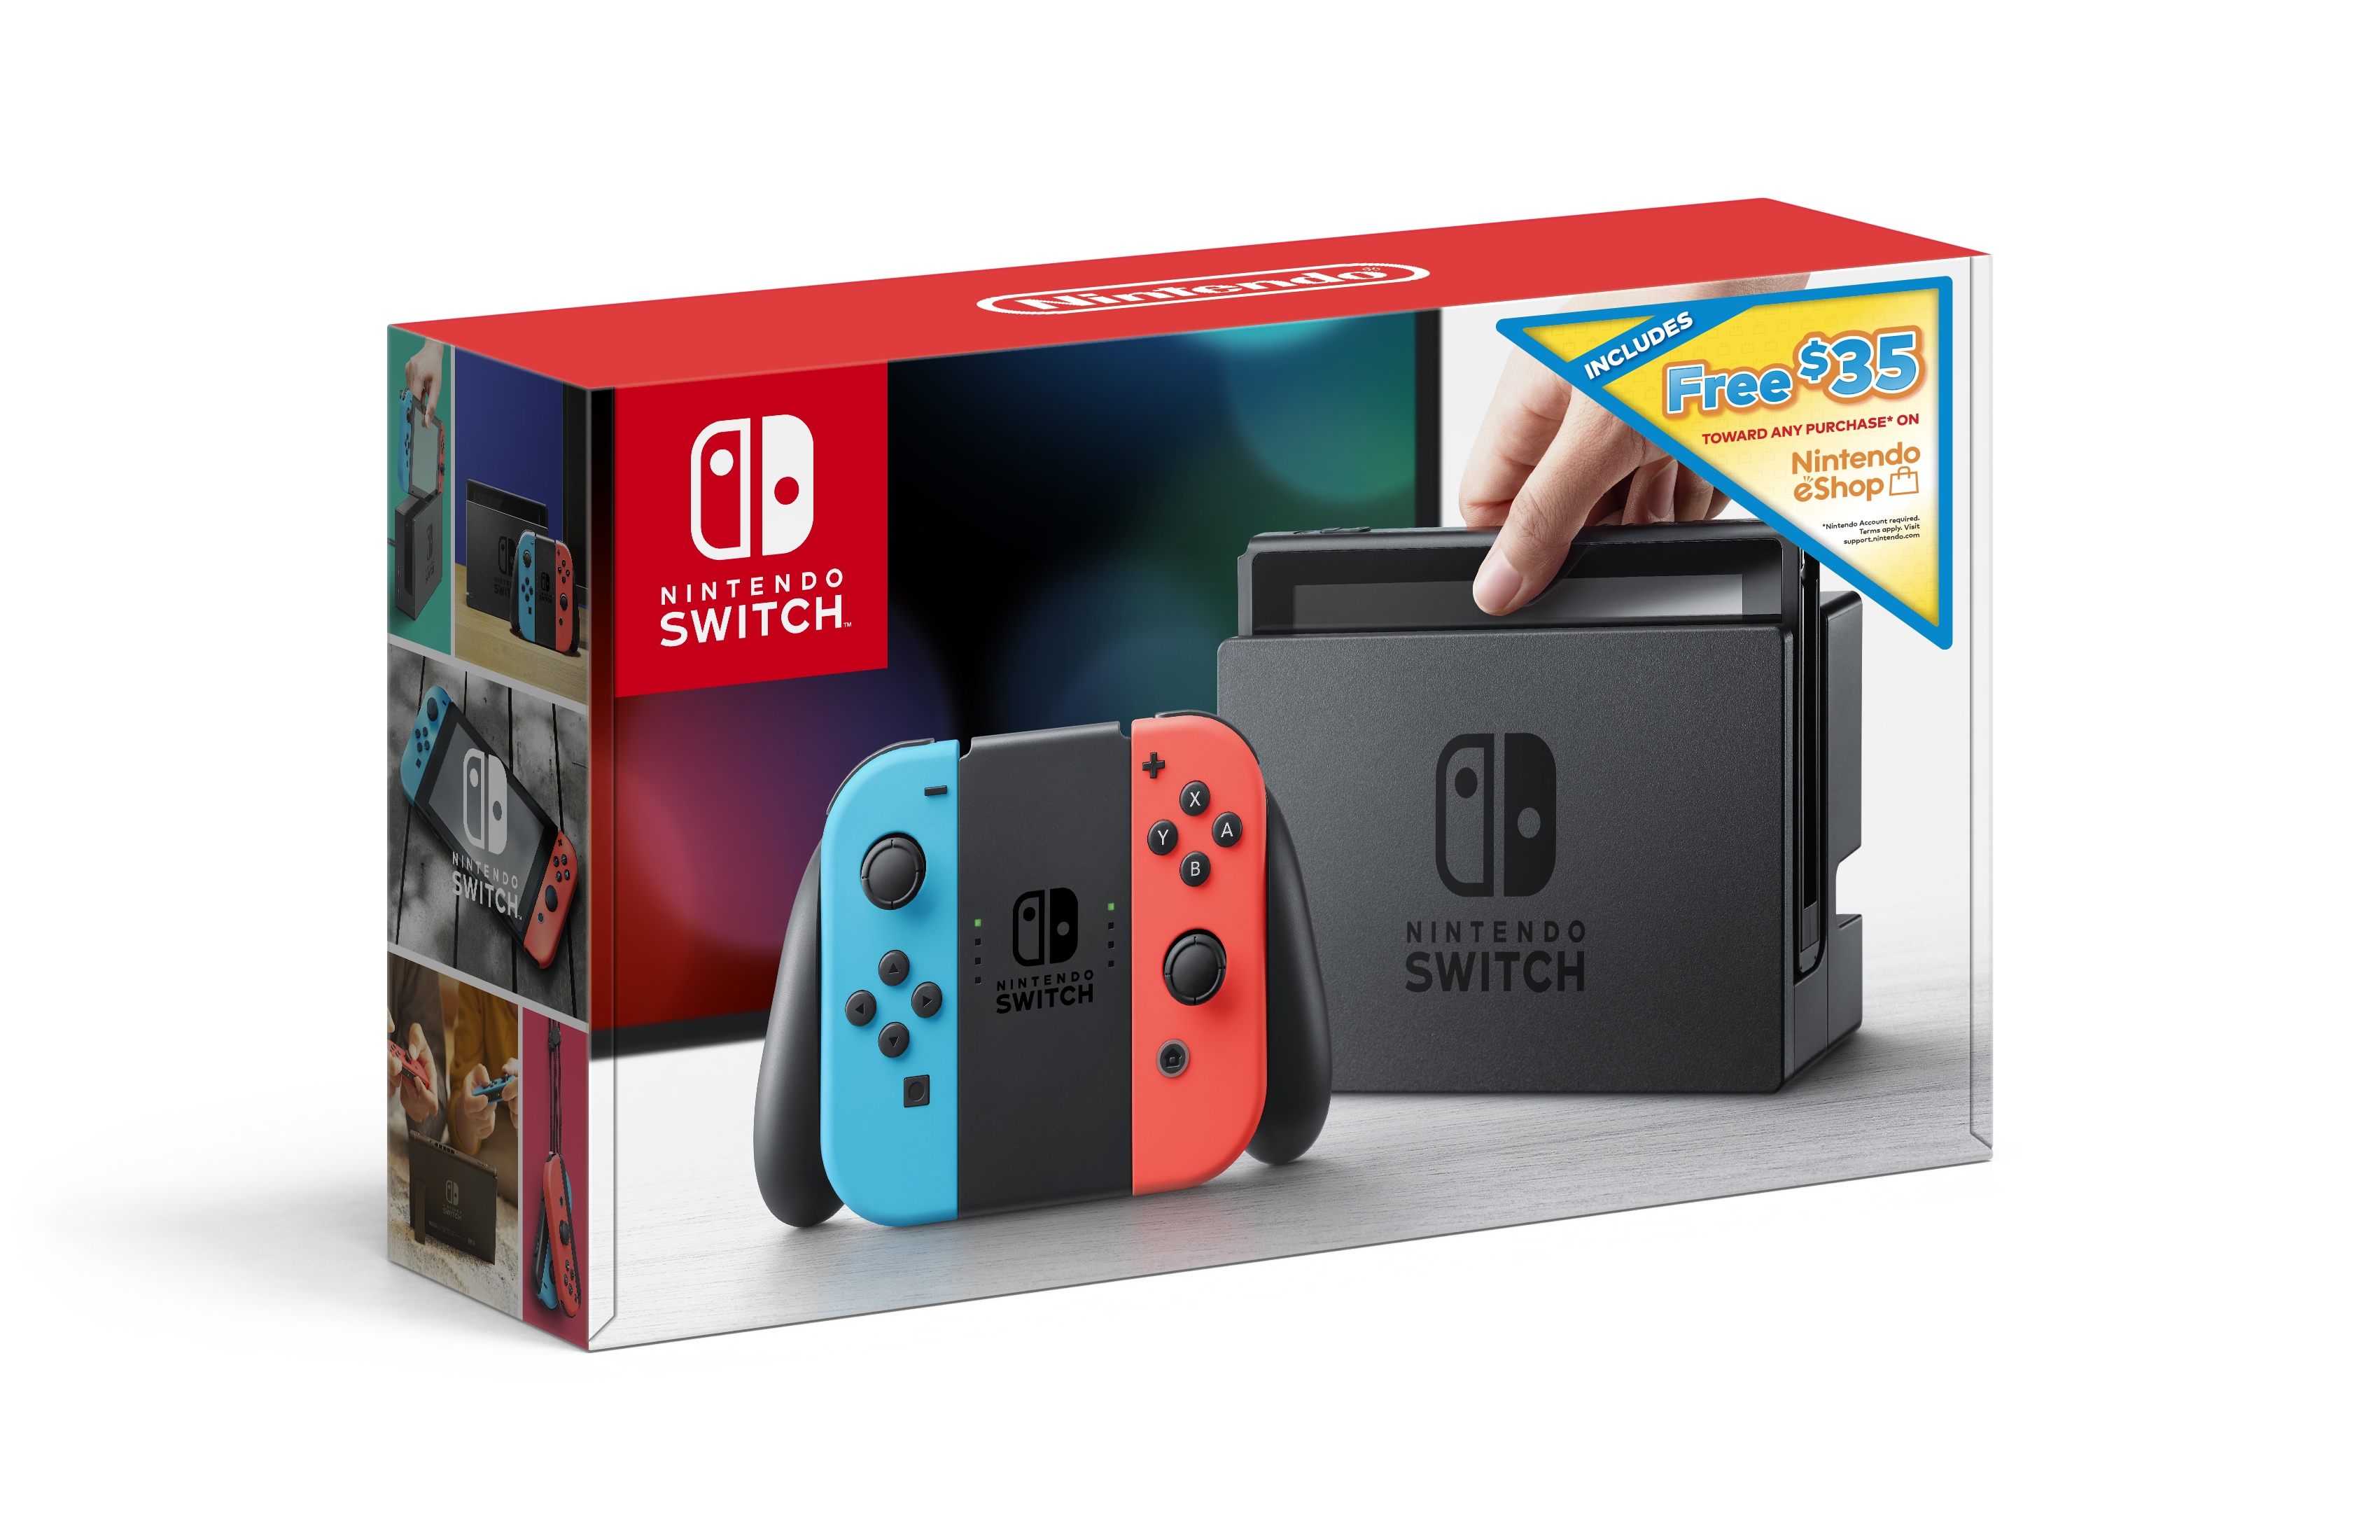 buying a switch with downloaded games